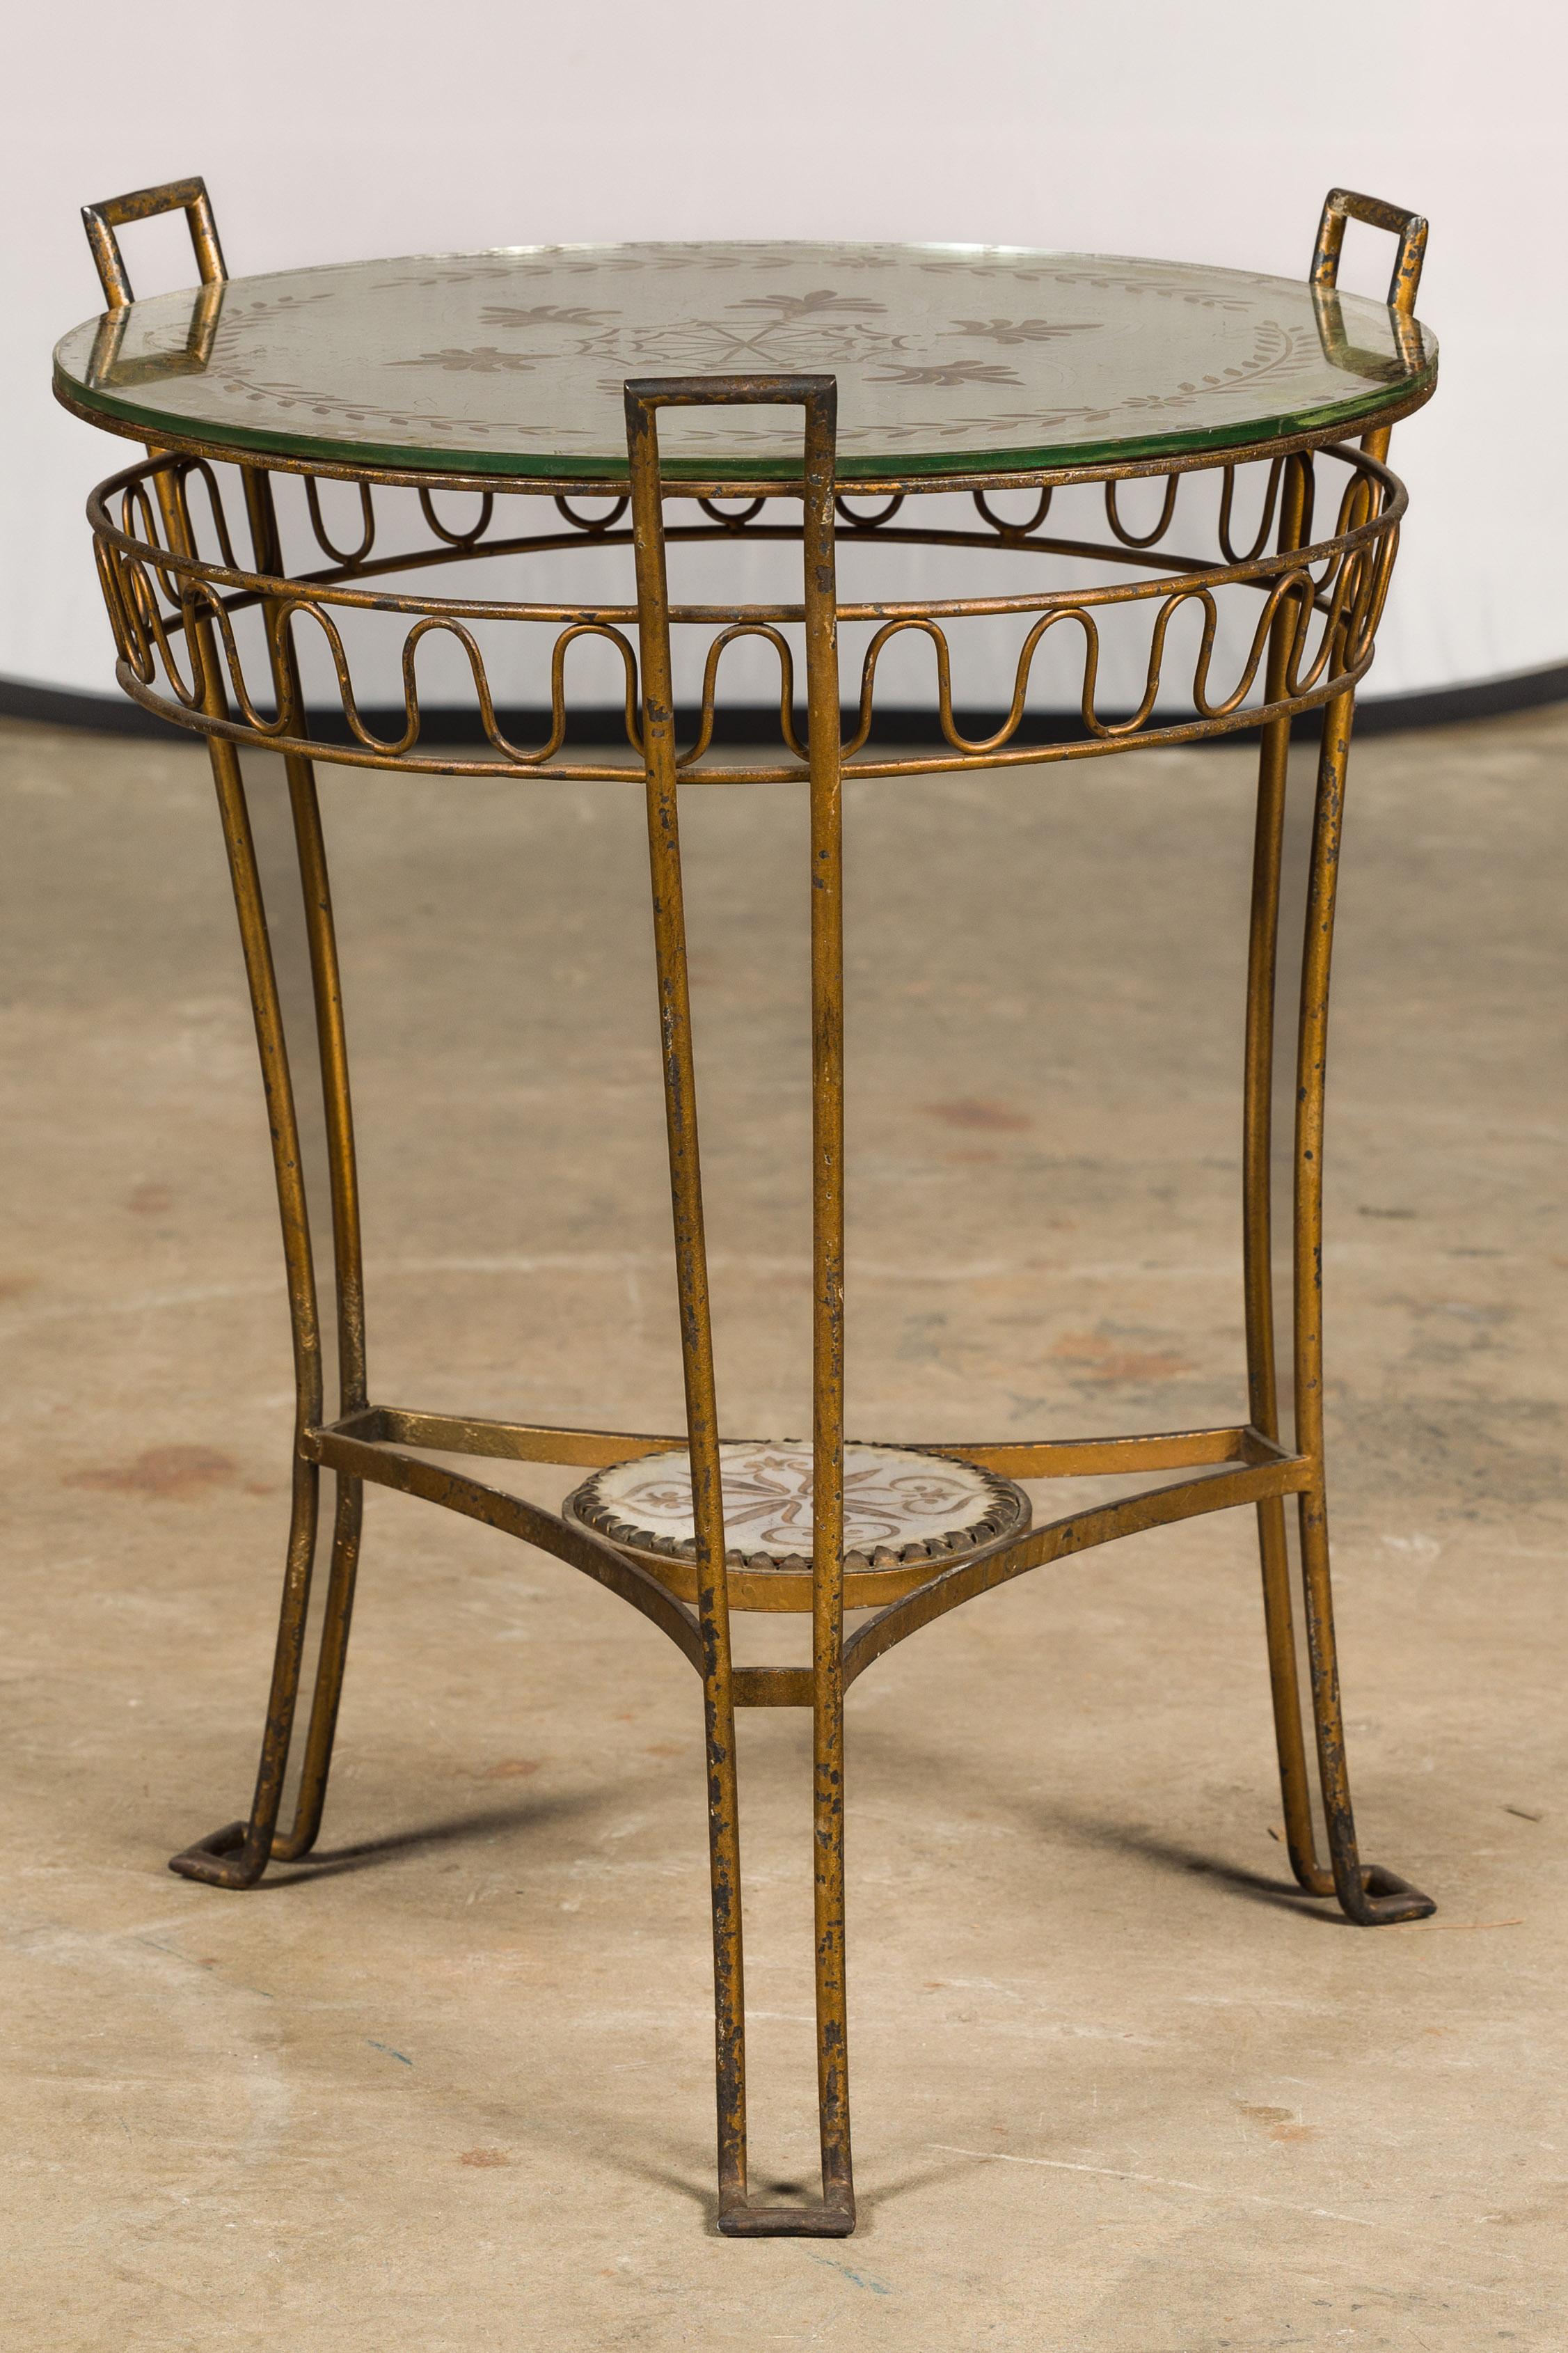 French 1920s Gilt Iron Side Table with Etched Foliage Mirrored Top and Low Shelf For Sale 2